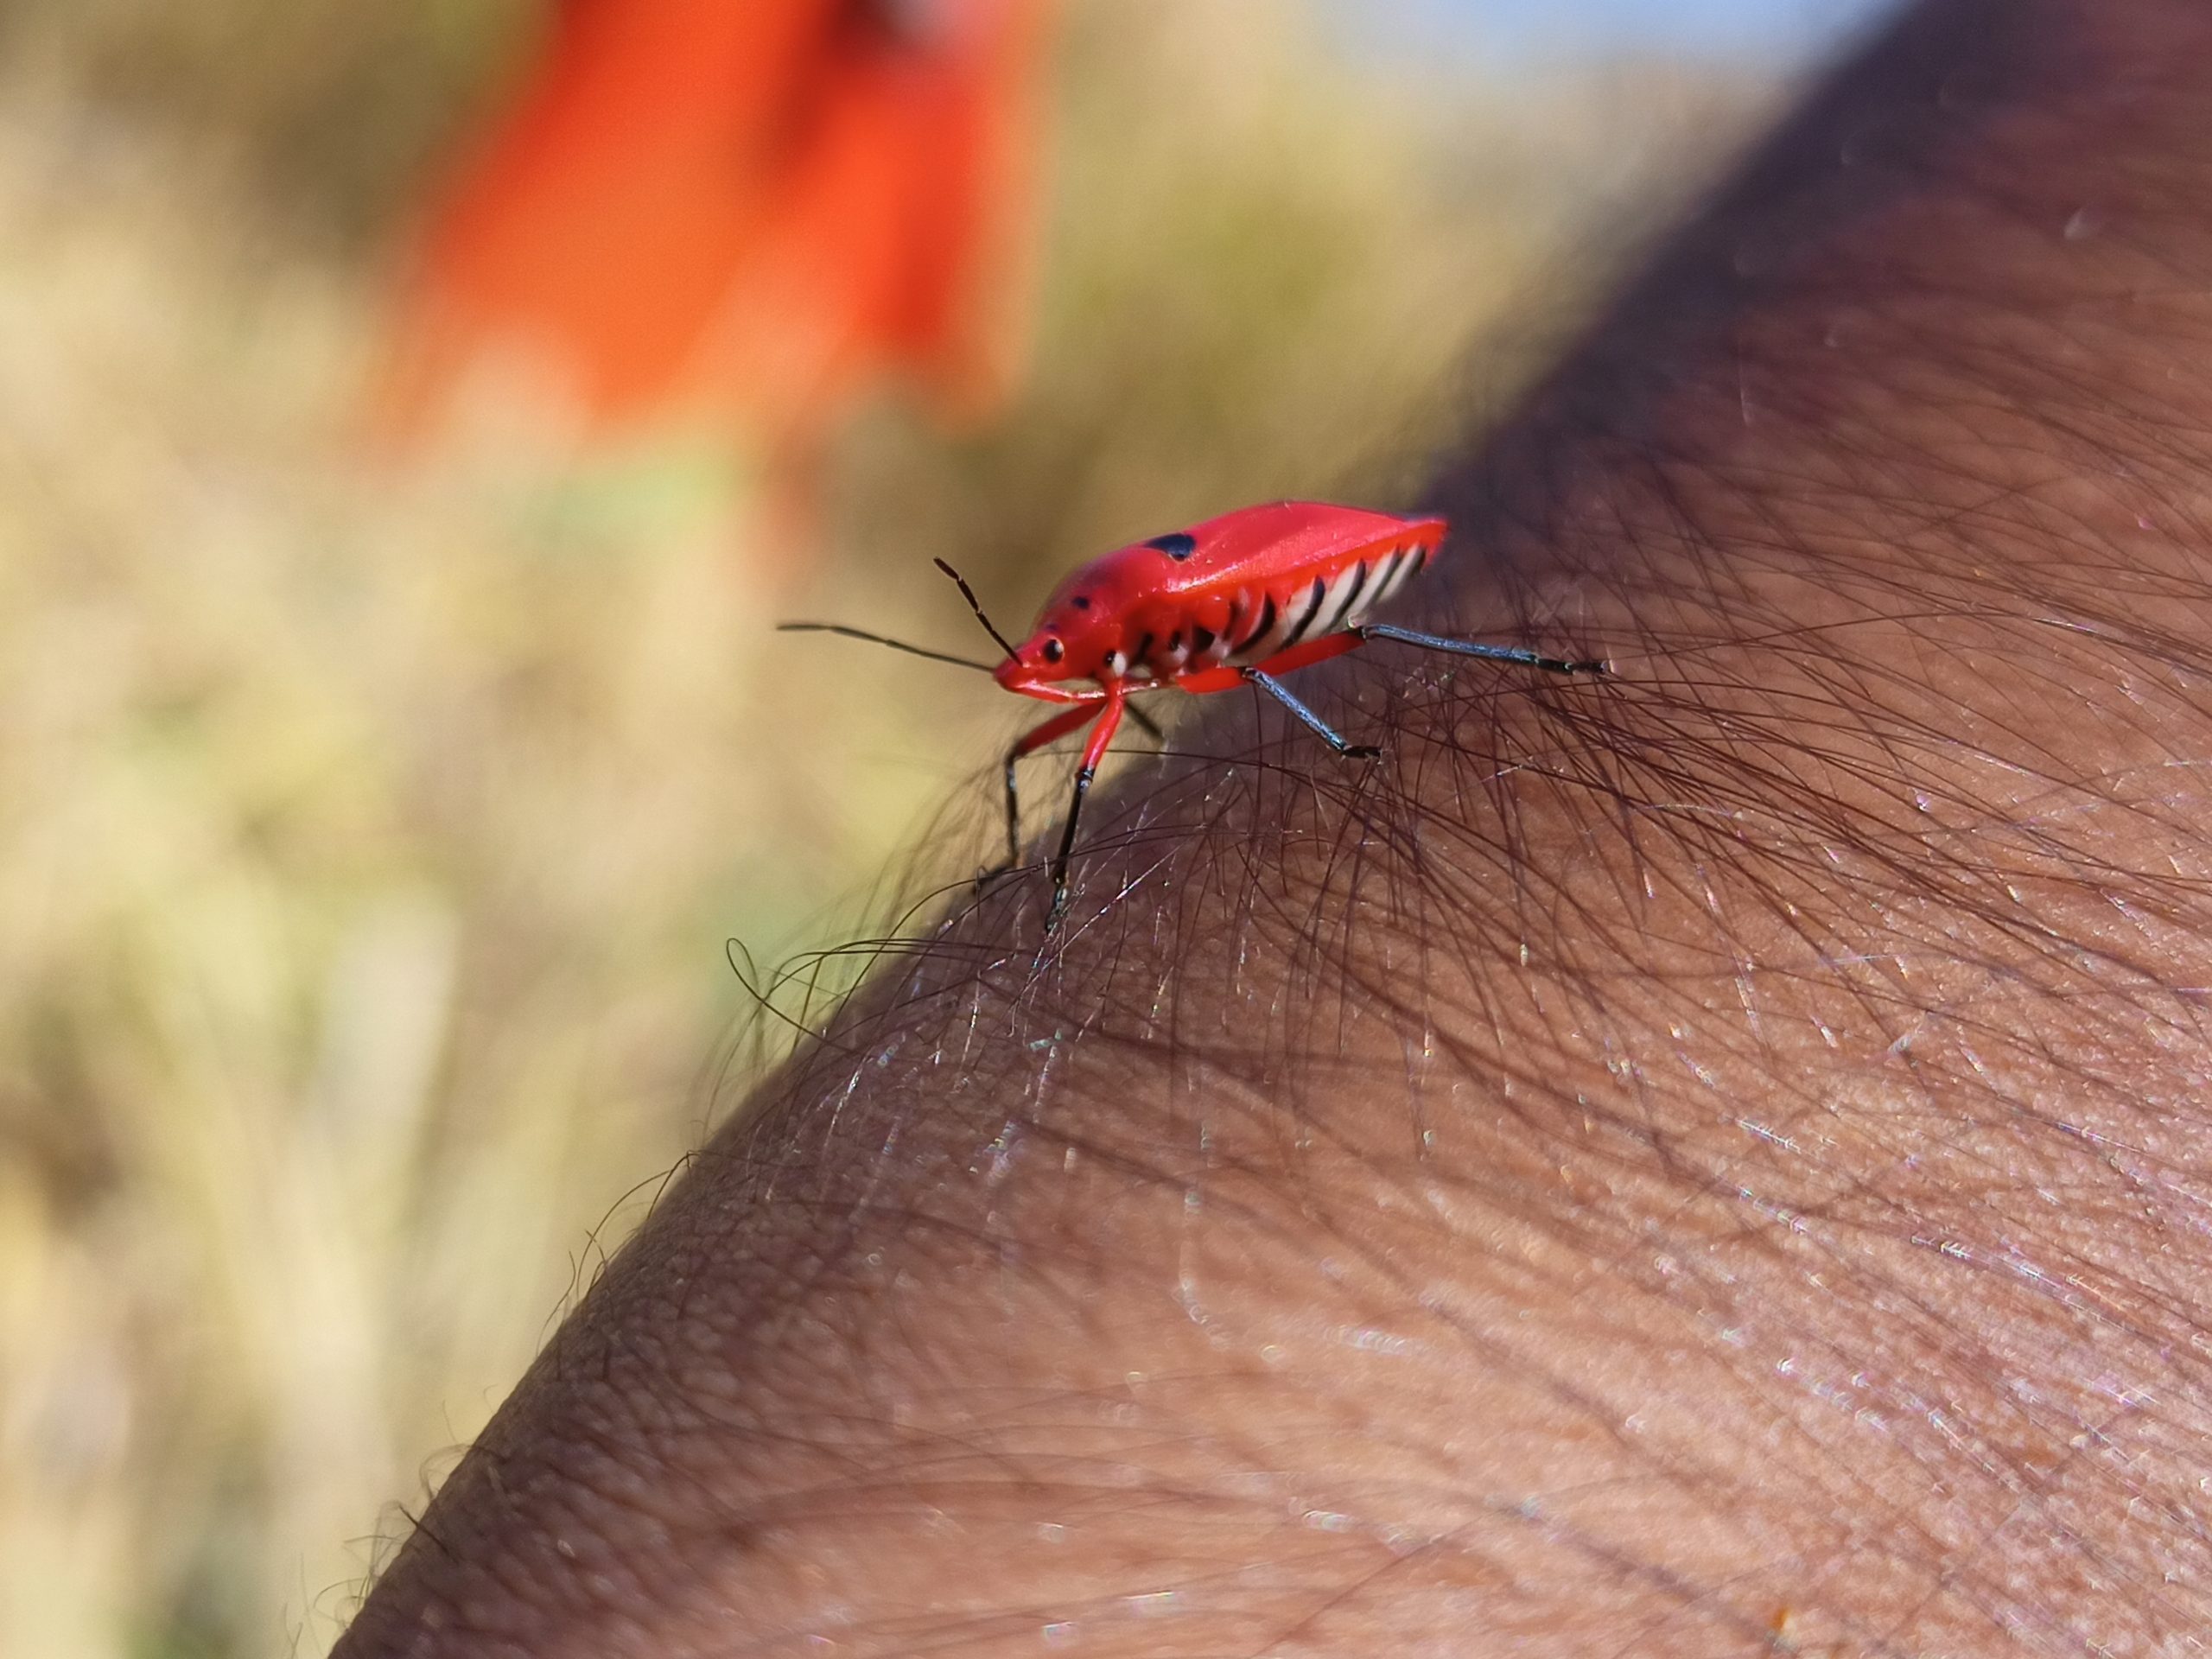 A red bug on human skin